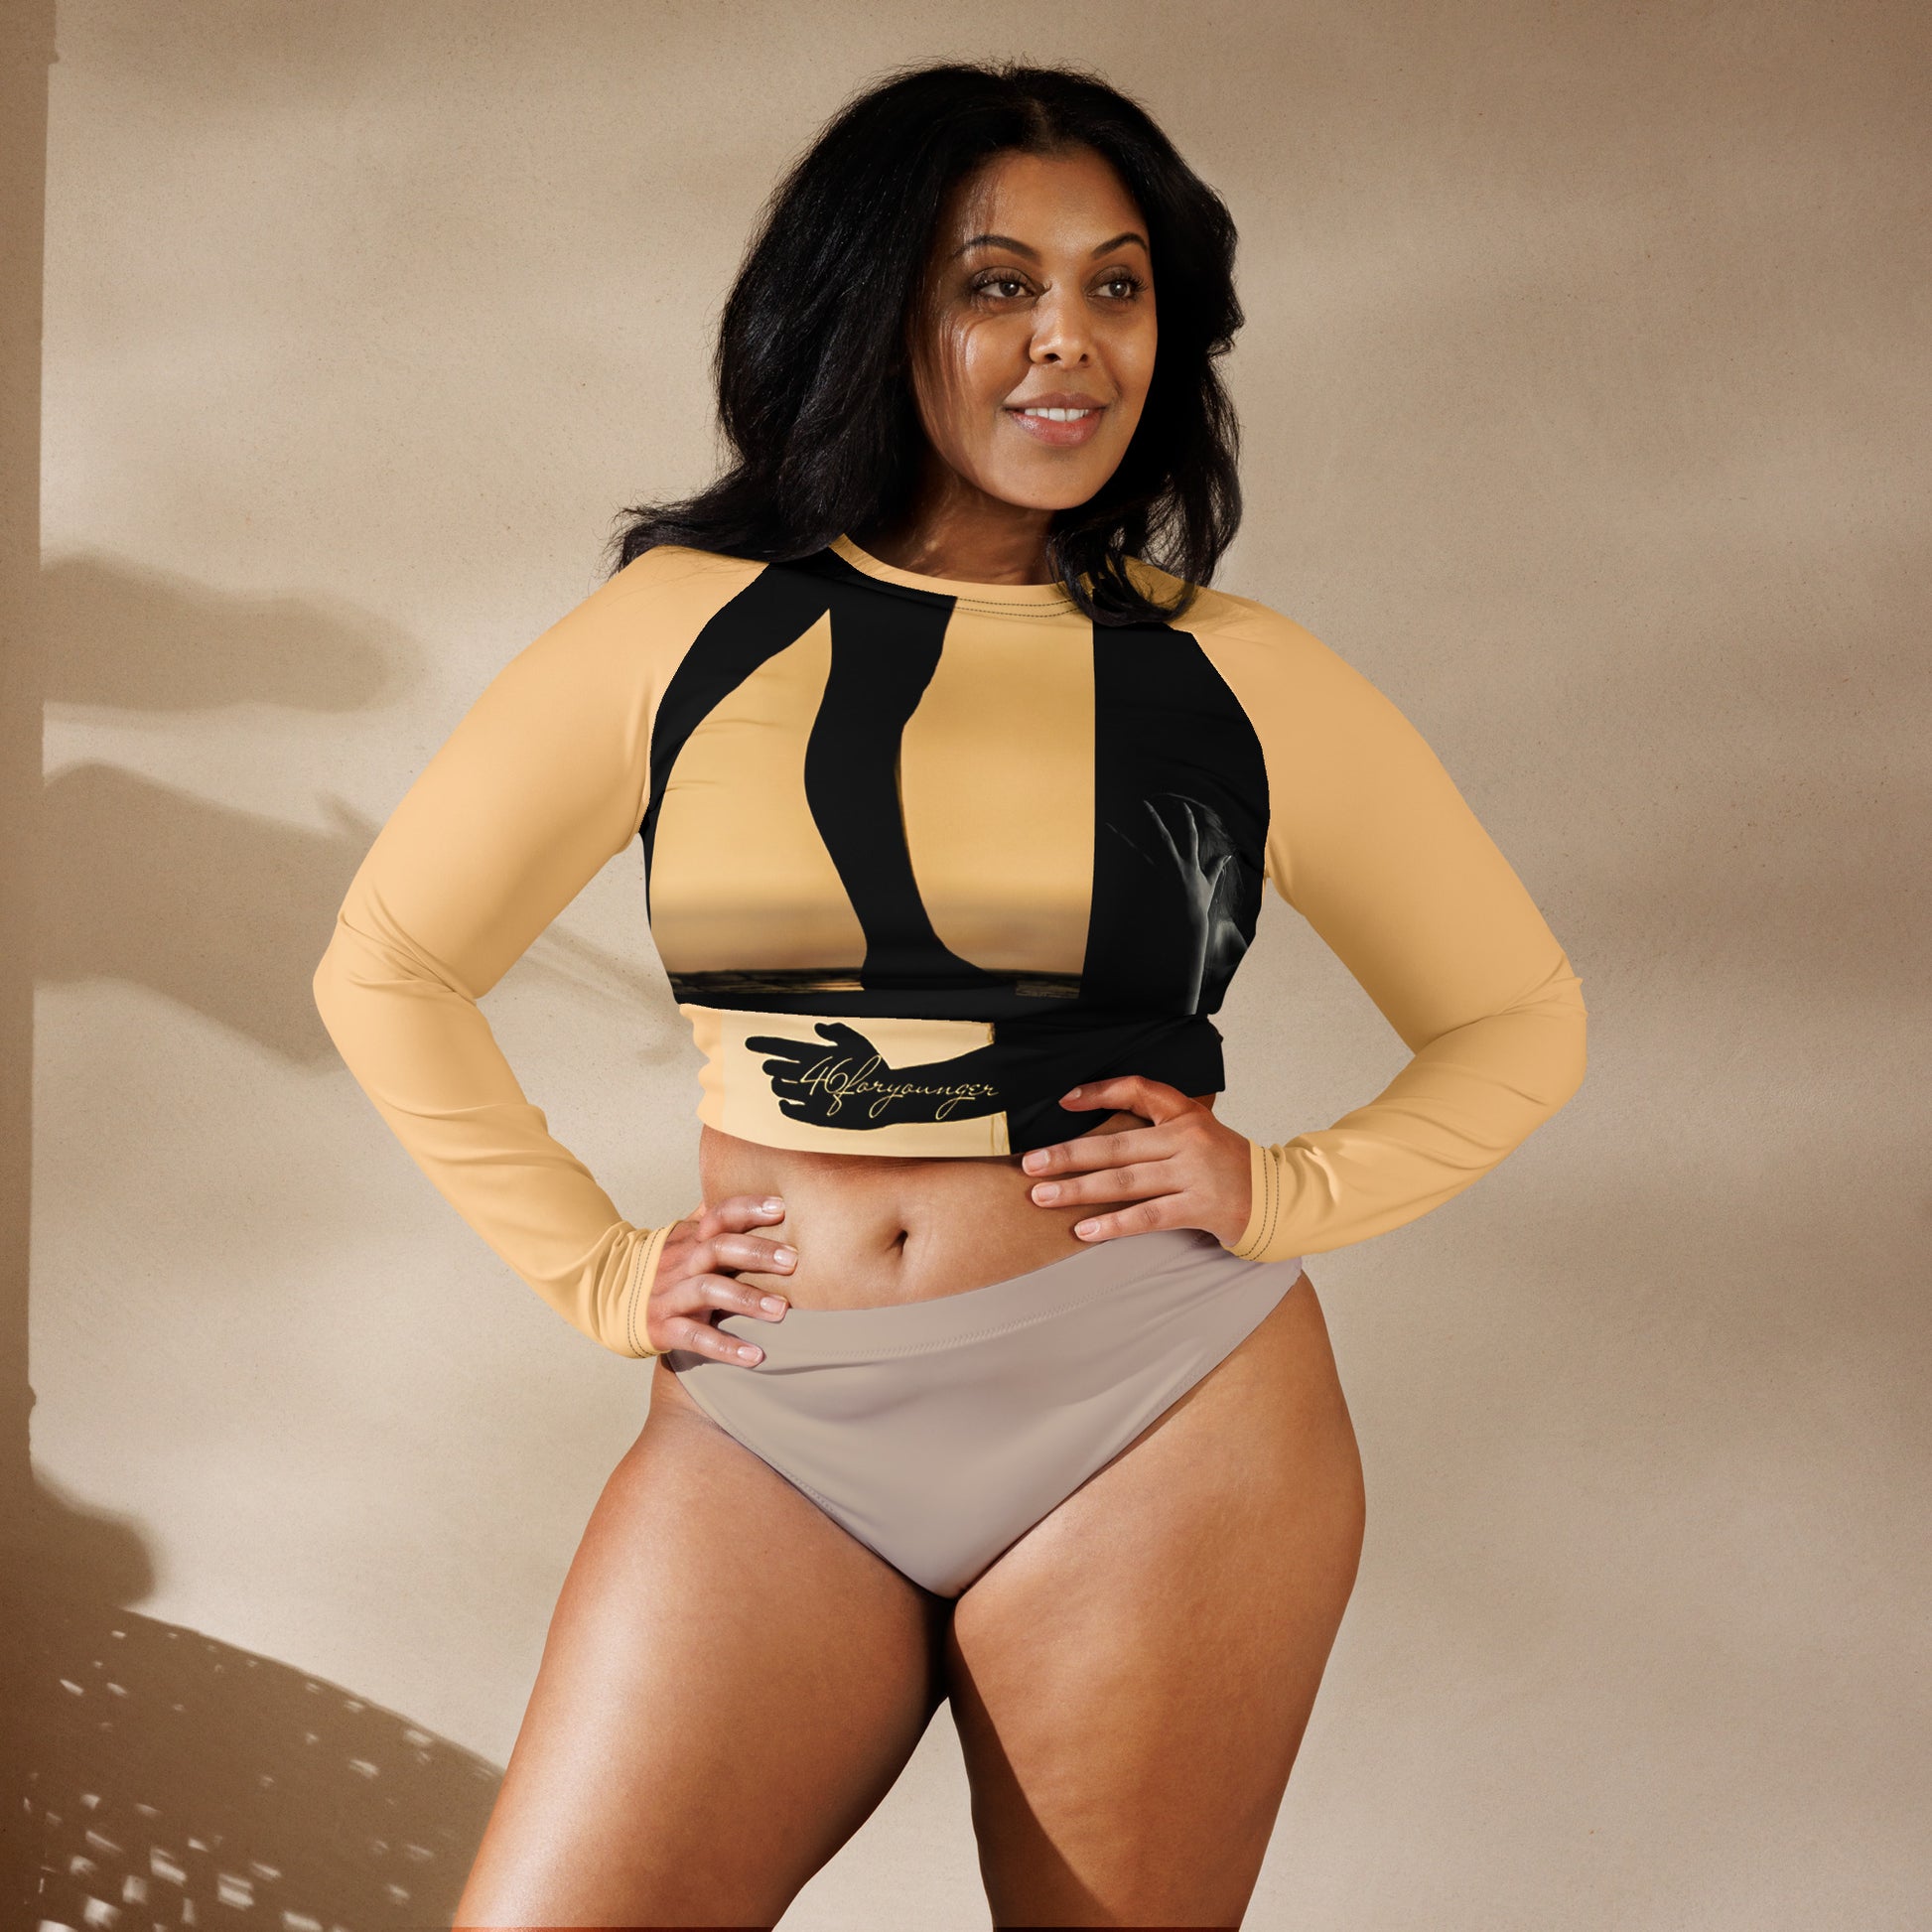 A-Ray of Emotions Long Sleeve Crop Top - AH Peach: A canvas for creative magic, inspired by the profound quote, in the enchanting Peach color.   'Every work of art begins with a ray of emotion, a torch of inspiration, a question searching for an answer.' Explore the journey of creativity in this captivating hue." - Plus Size